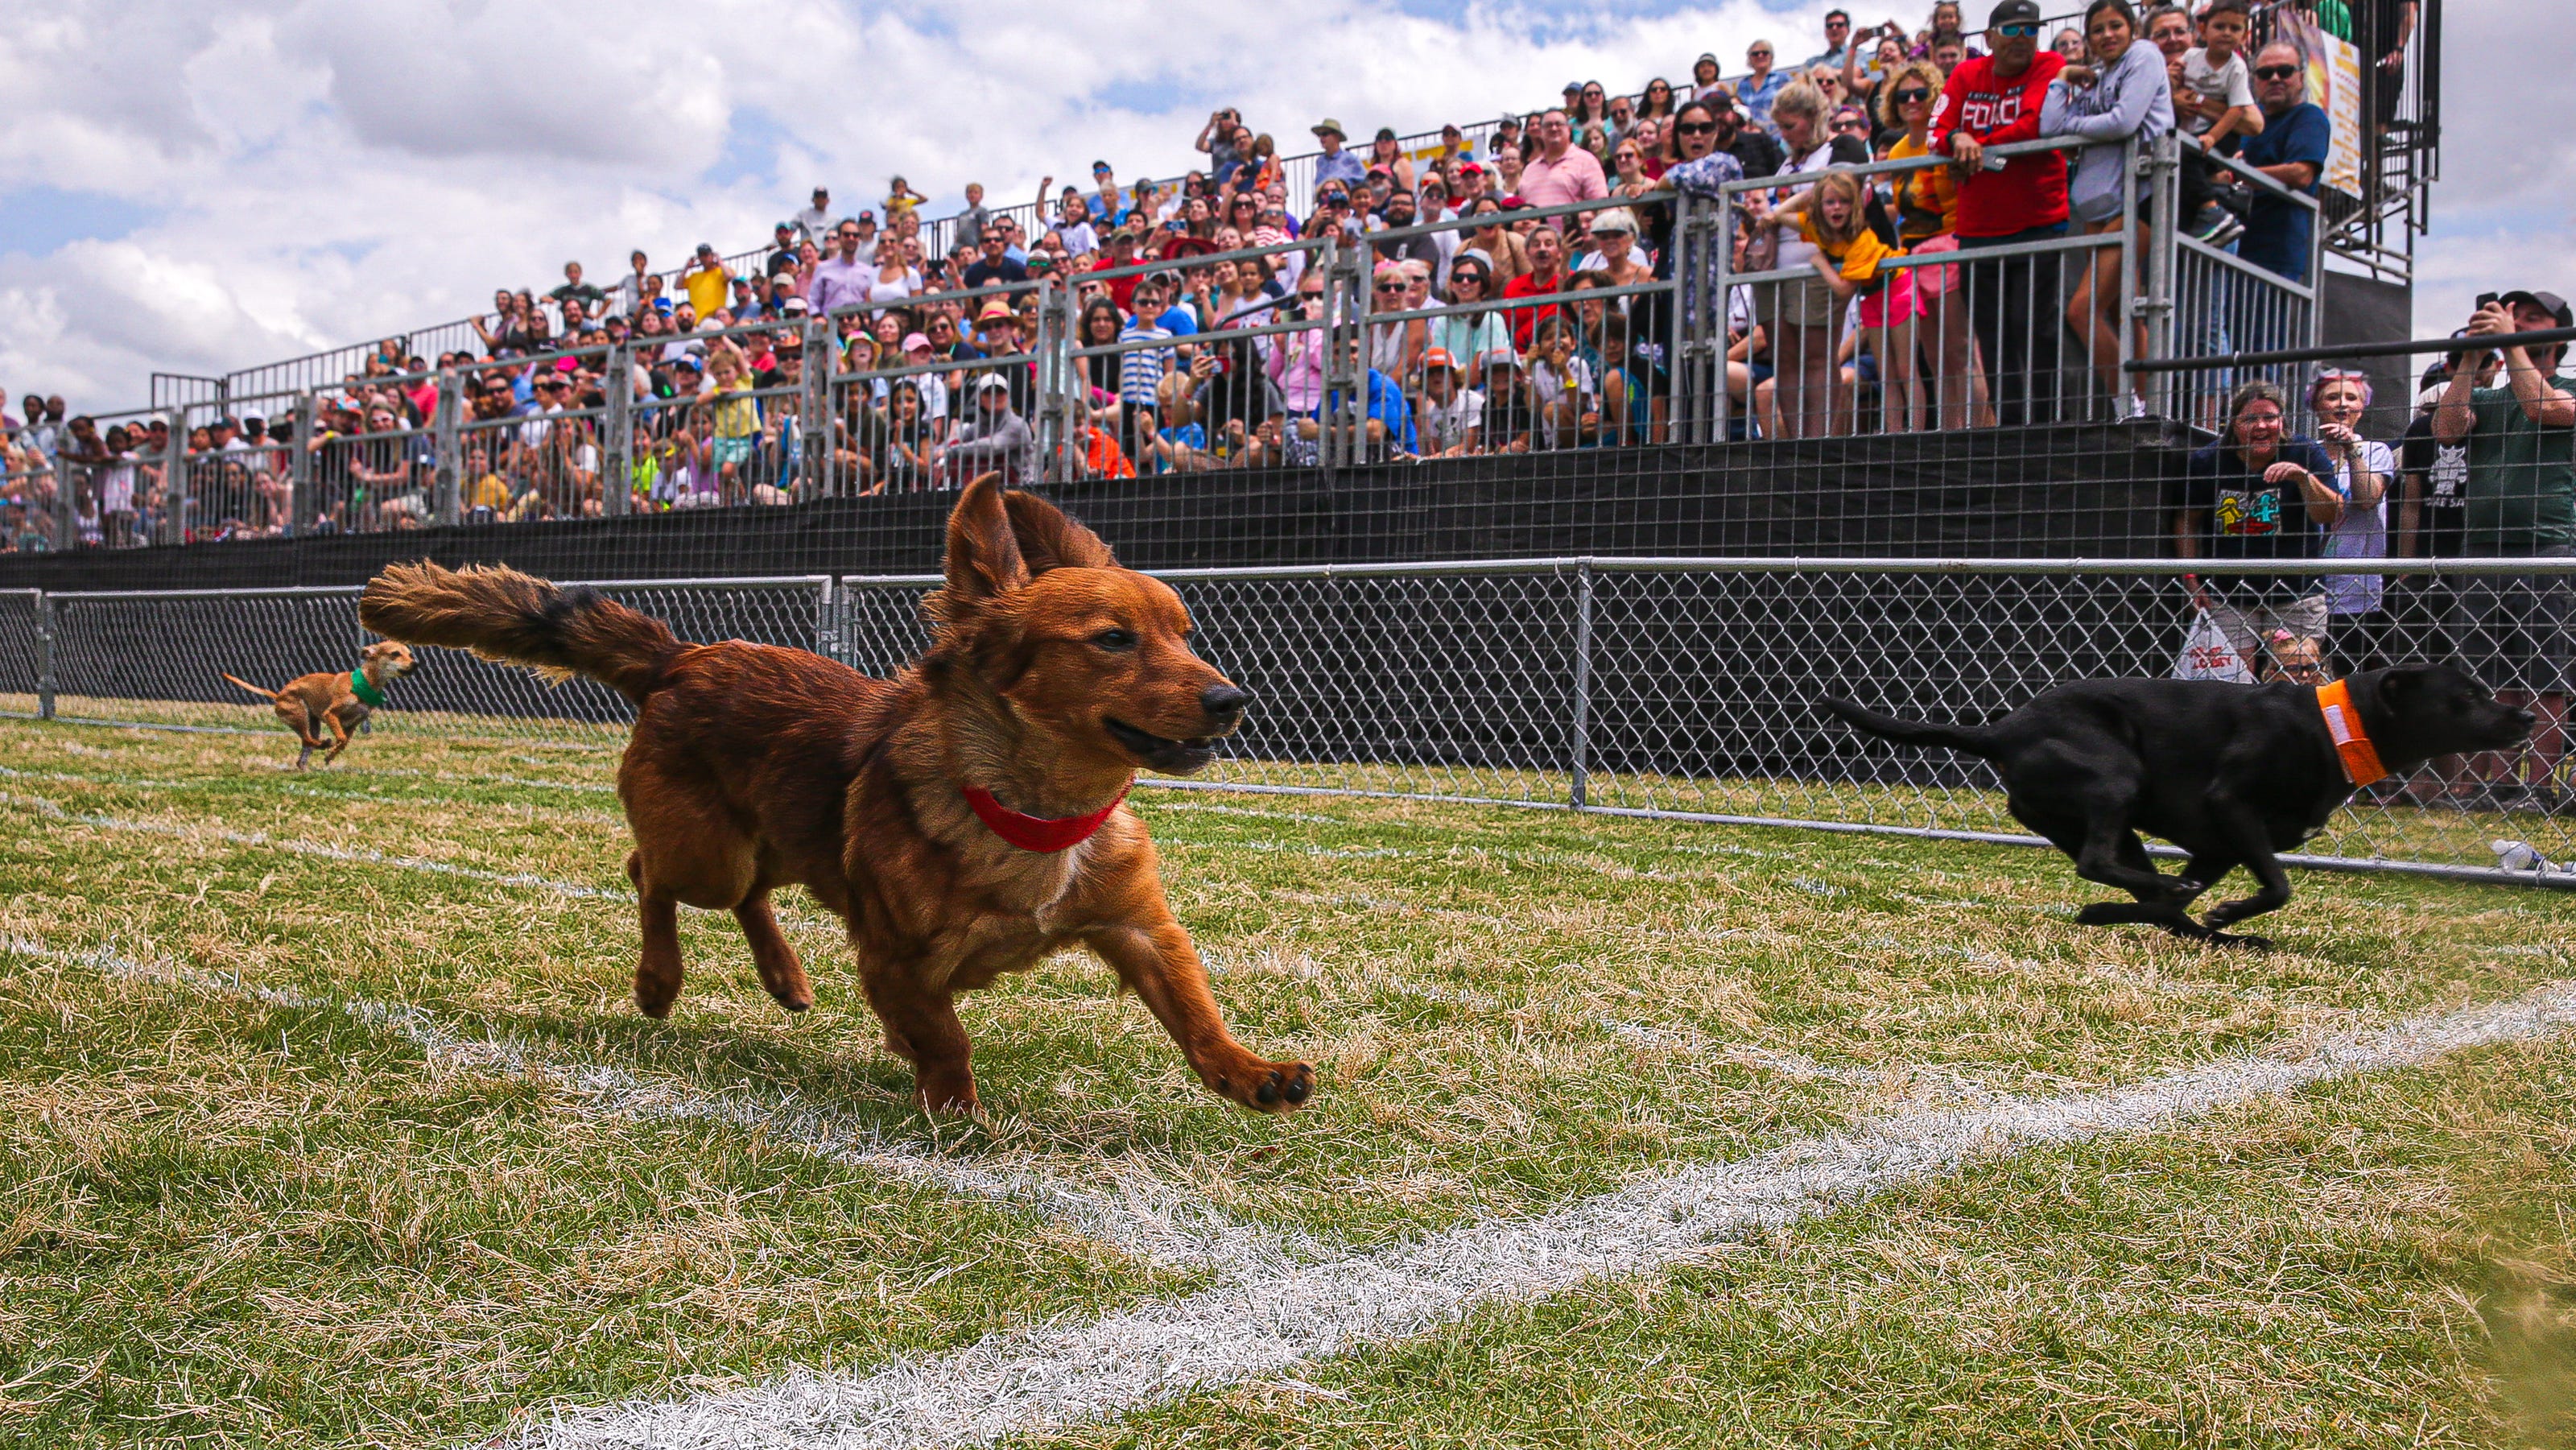 2023 Buda Wiener Dog Races return for 26th year. Here's how it started